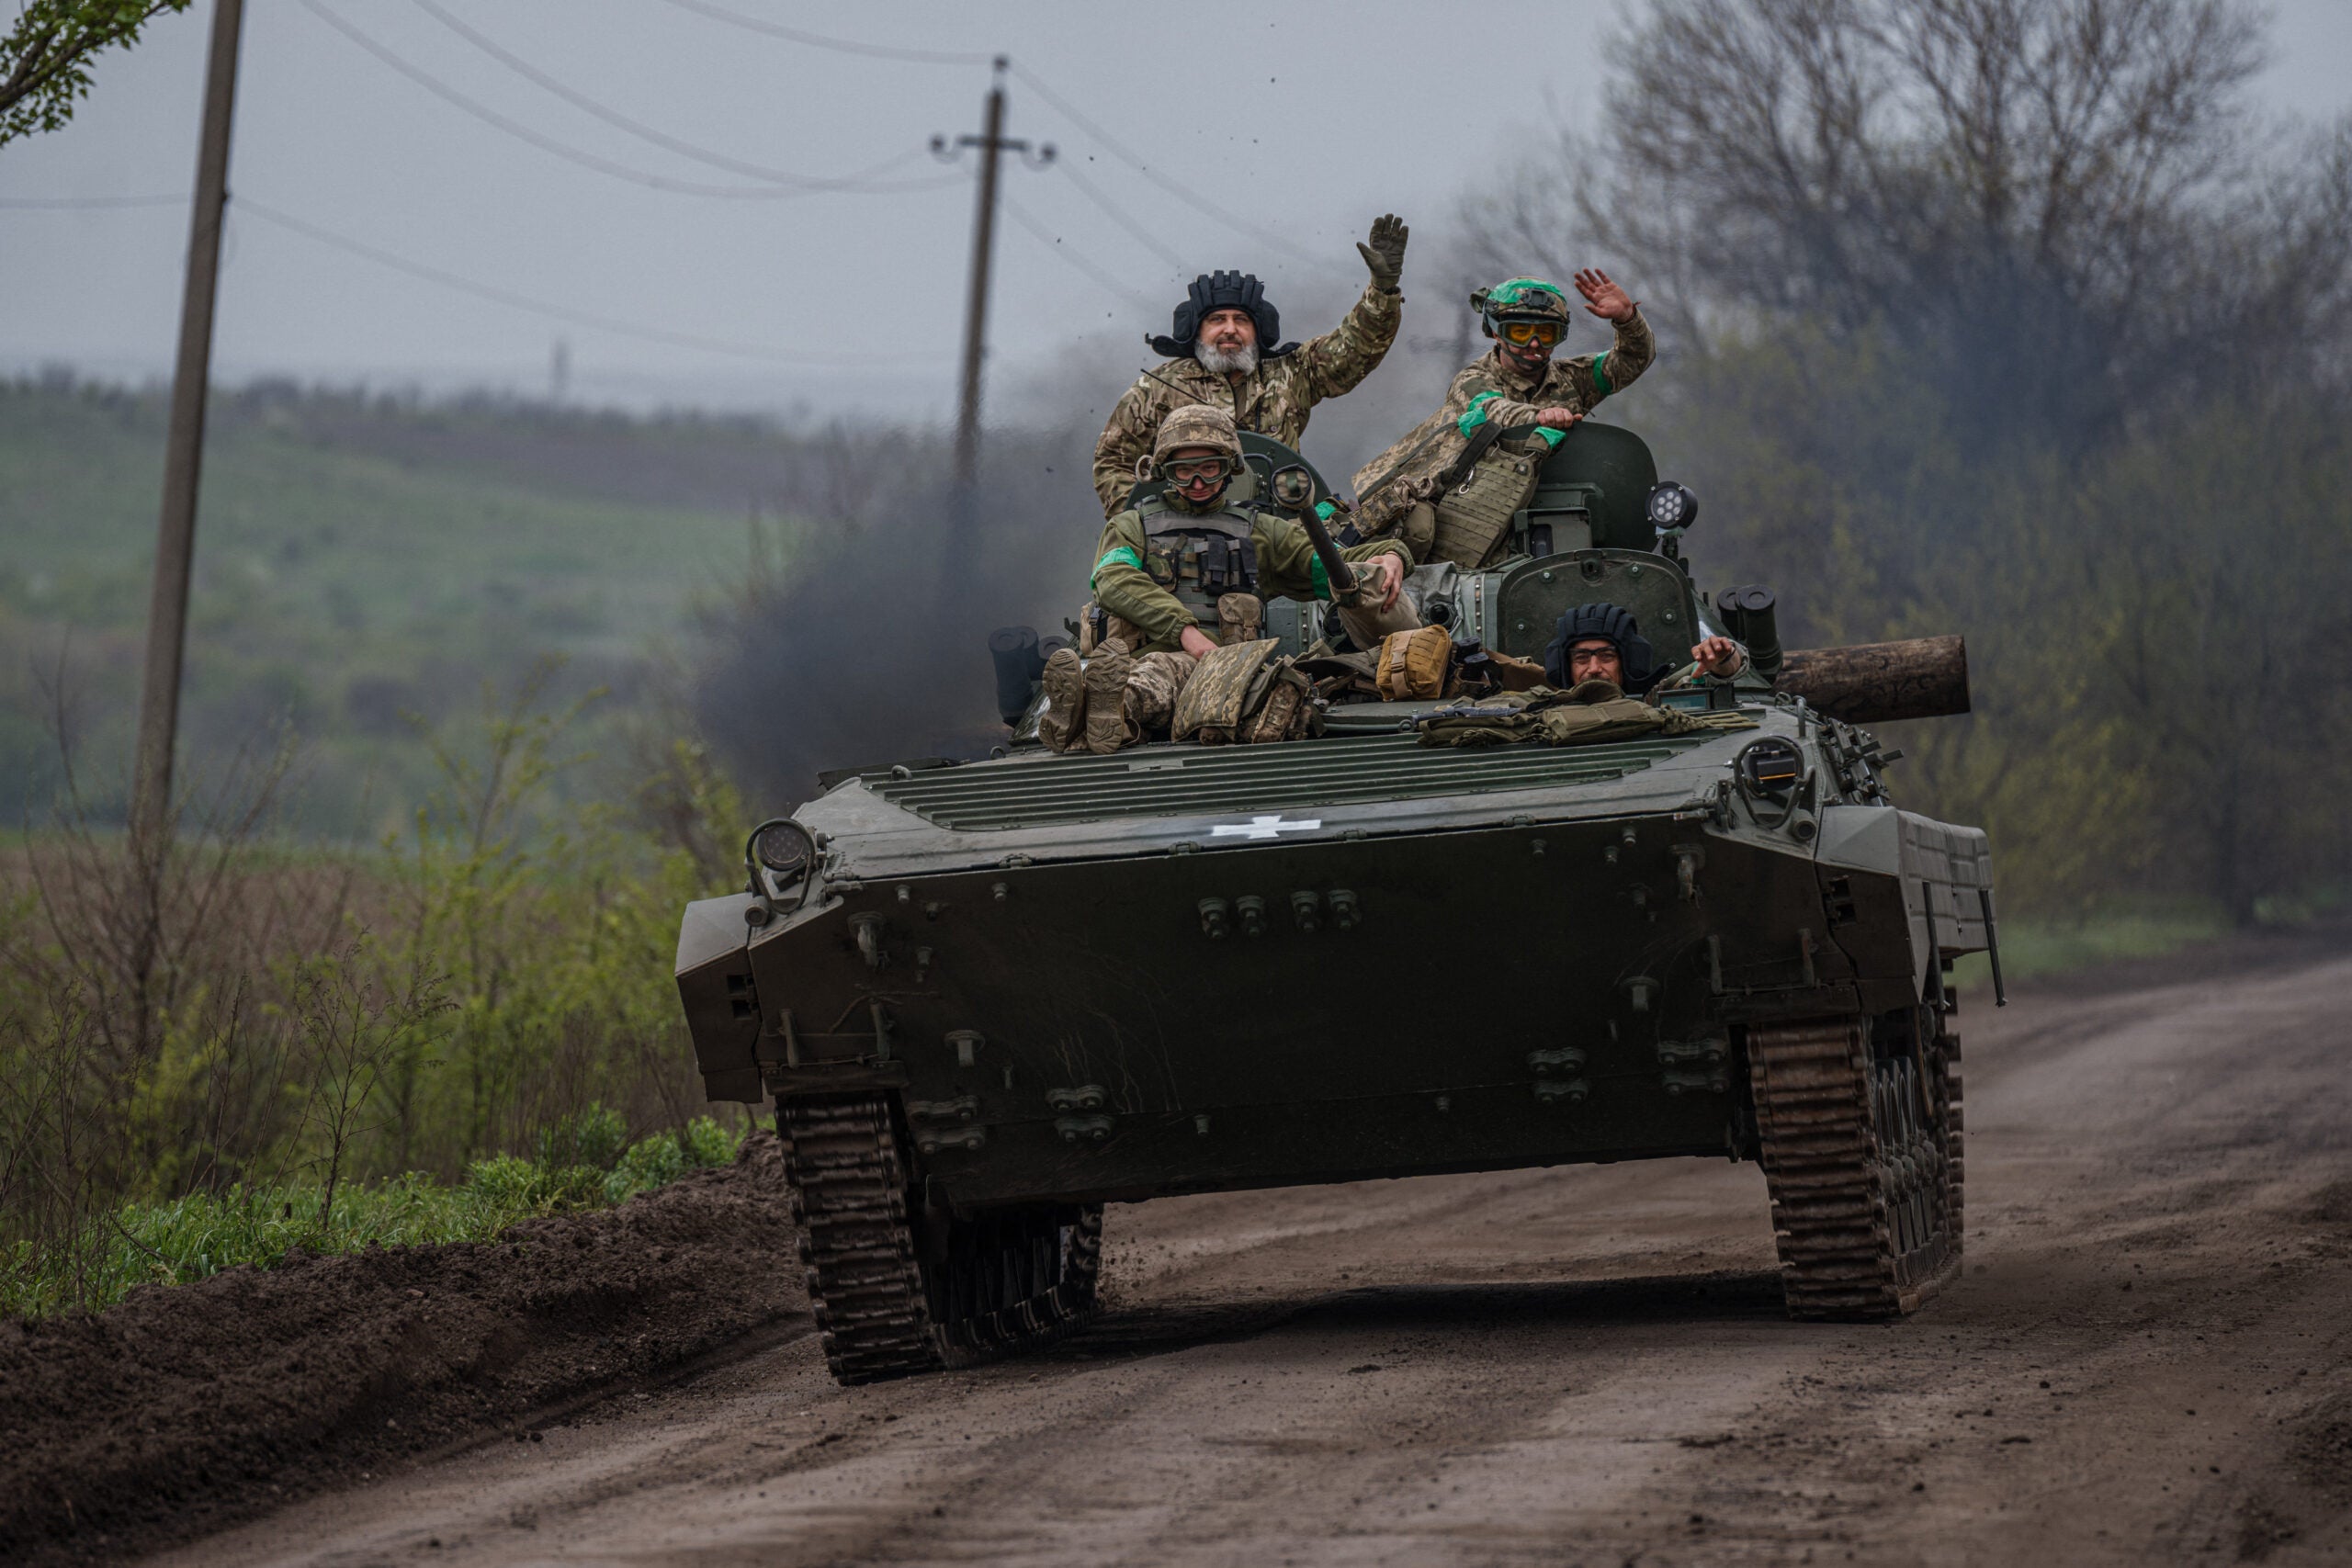 Ukrainian servicemen ride in a BMP infantry fighting vehicle near the town of Bakhmut, in the Donetsk region, on April 28, 2023, amid the Russian invasion on Ukraine. (Photo by Dimitar DILKOFF / AFP) (Photo by DIMITAR DILKOFF/AFP via Getty Images)